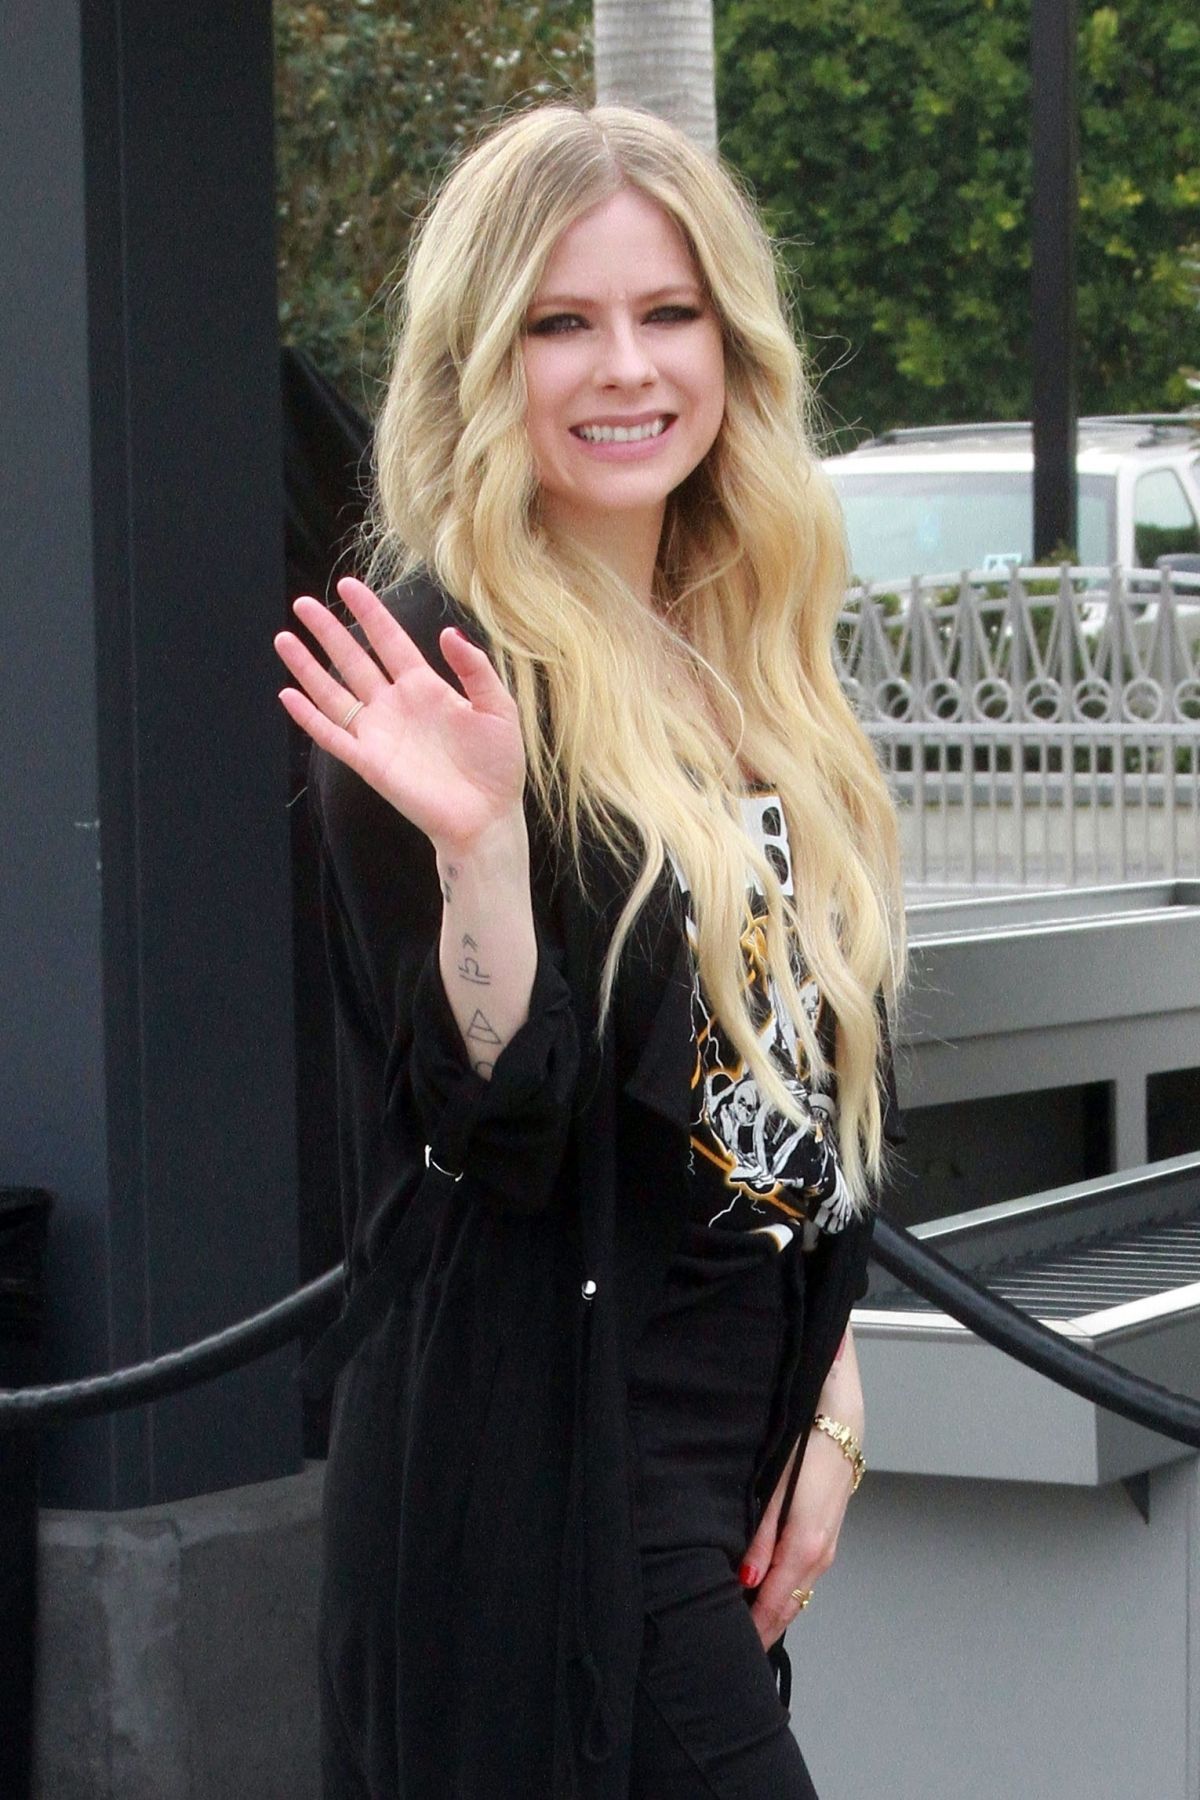 AVRIL LAVIGNE at Extra at Universal Studios in Hollywood 02/27/2019 – HawtCelebs1200 x 1800